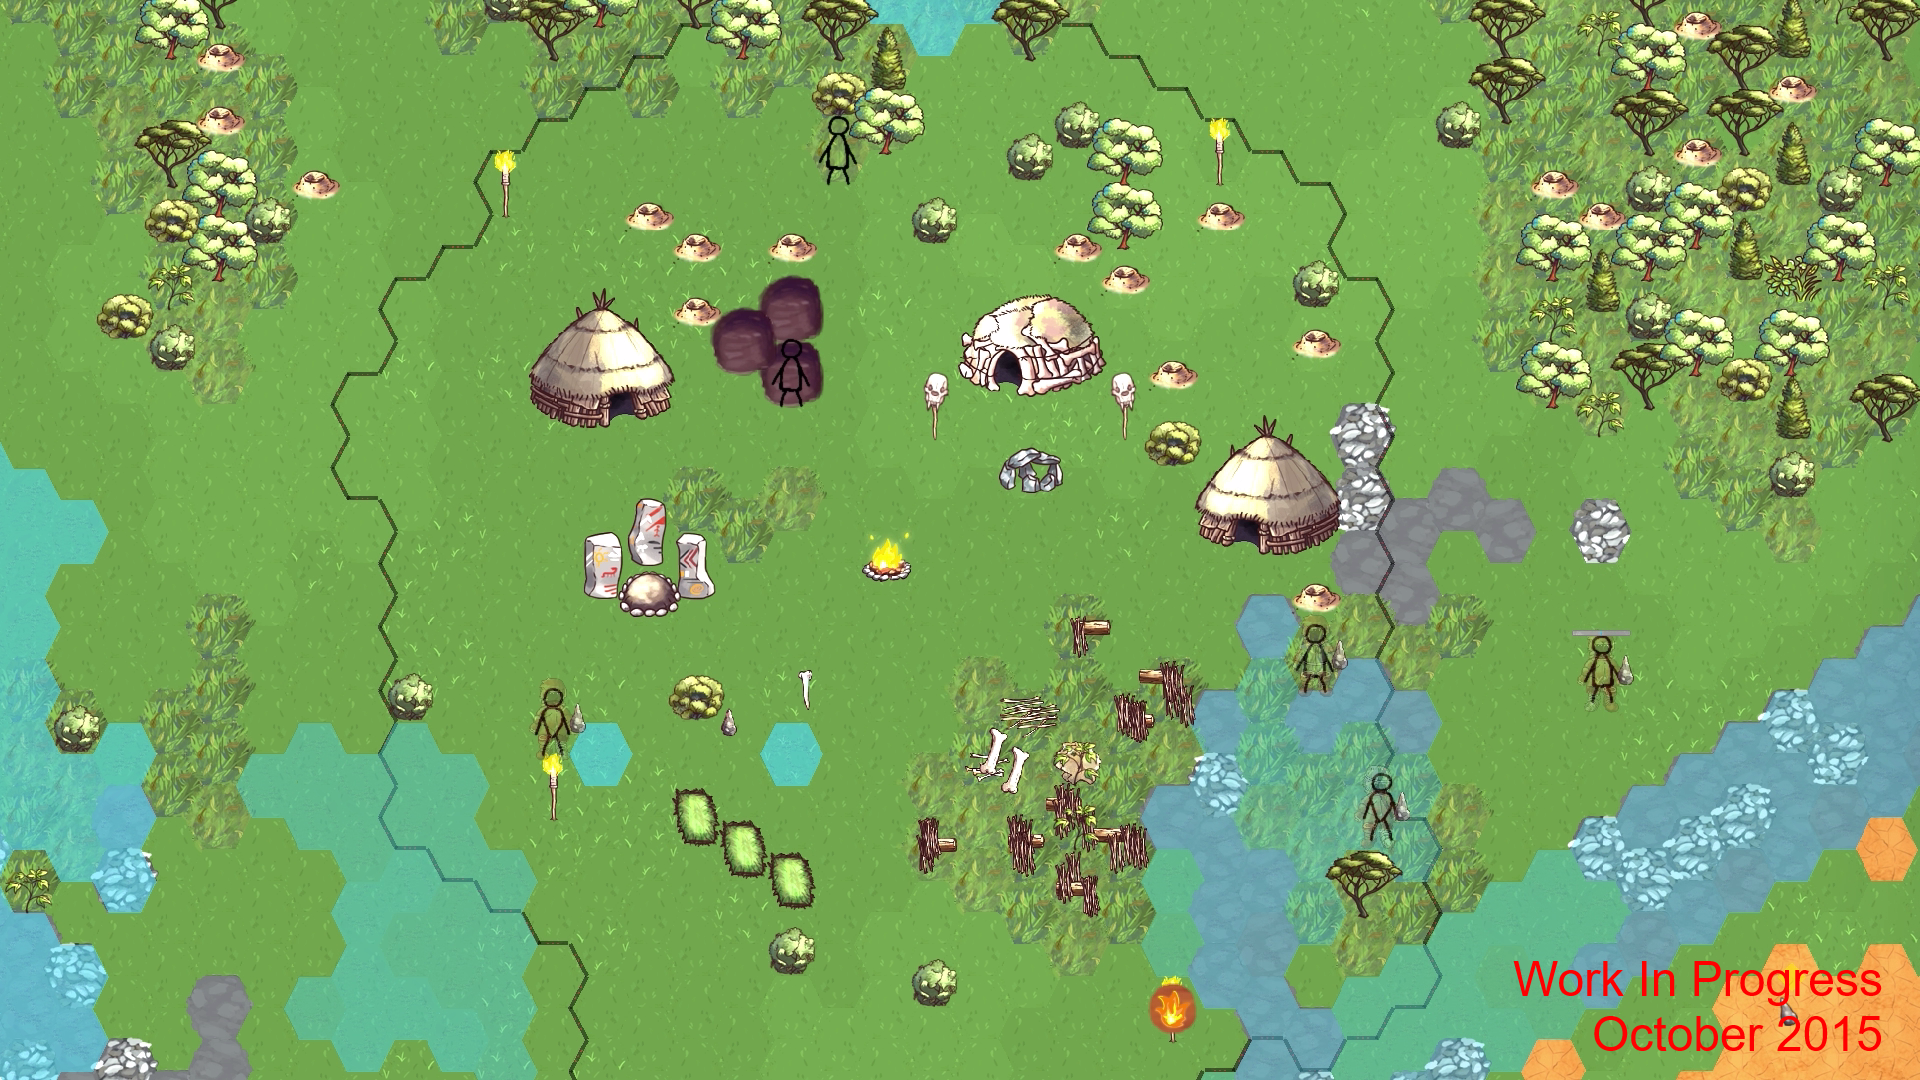 Tribal Survival Game